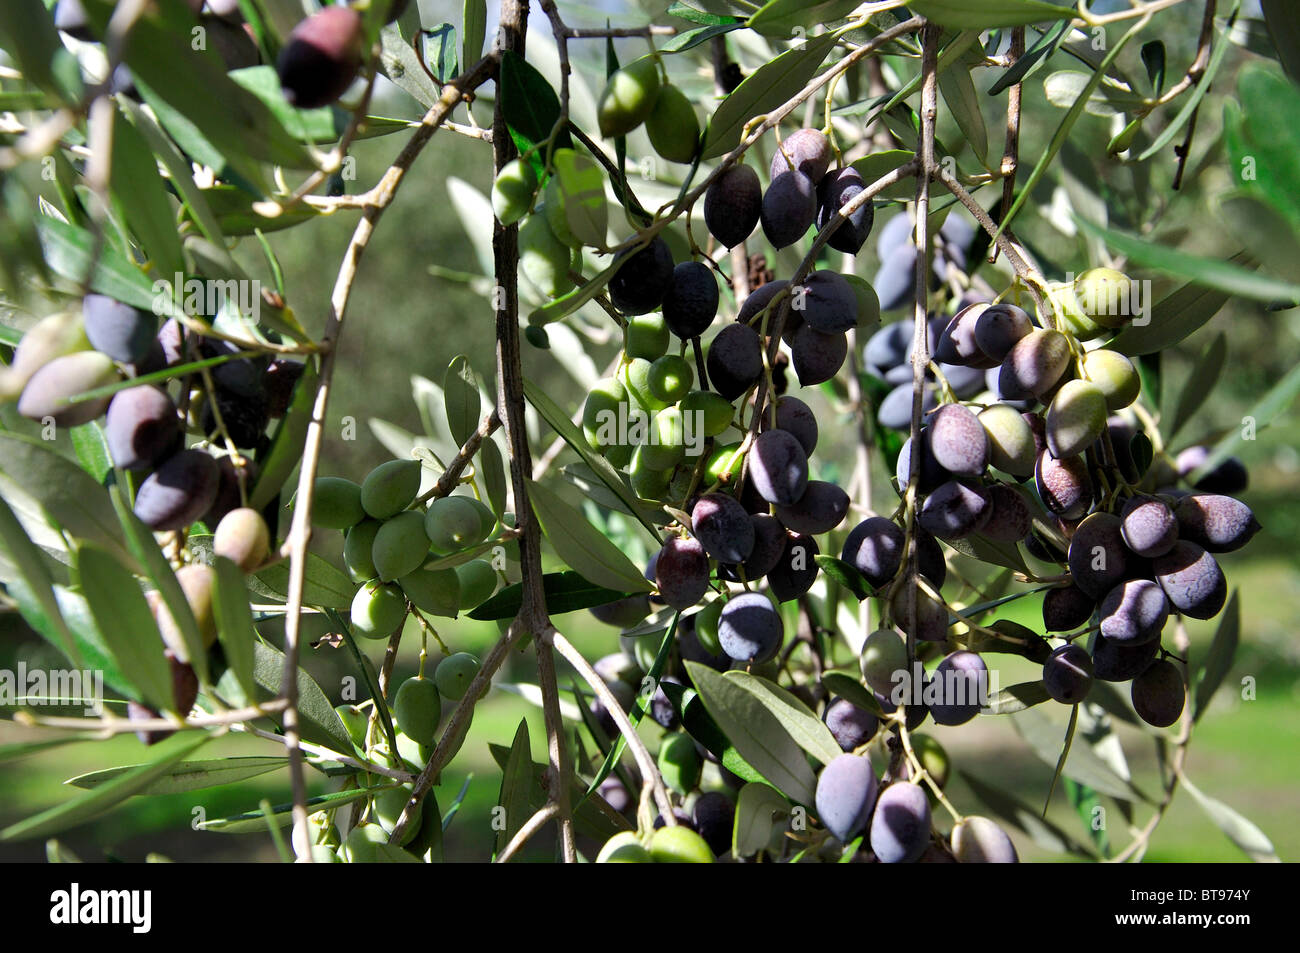 Branches with ripening olives, Zakynthos (Zante), Ionian Islands, Greece Stock Photo